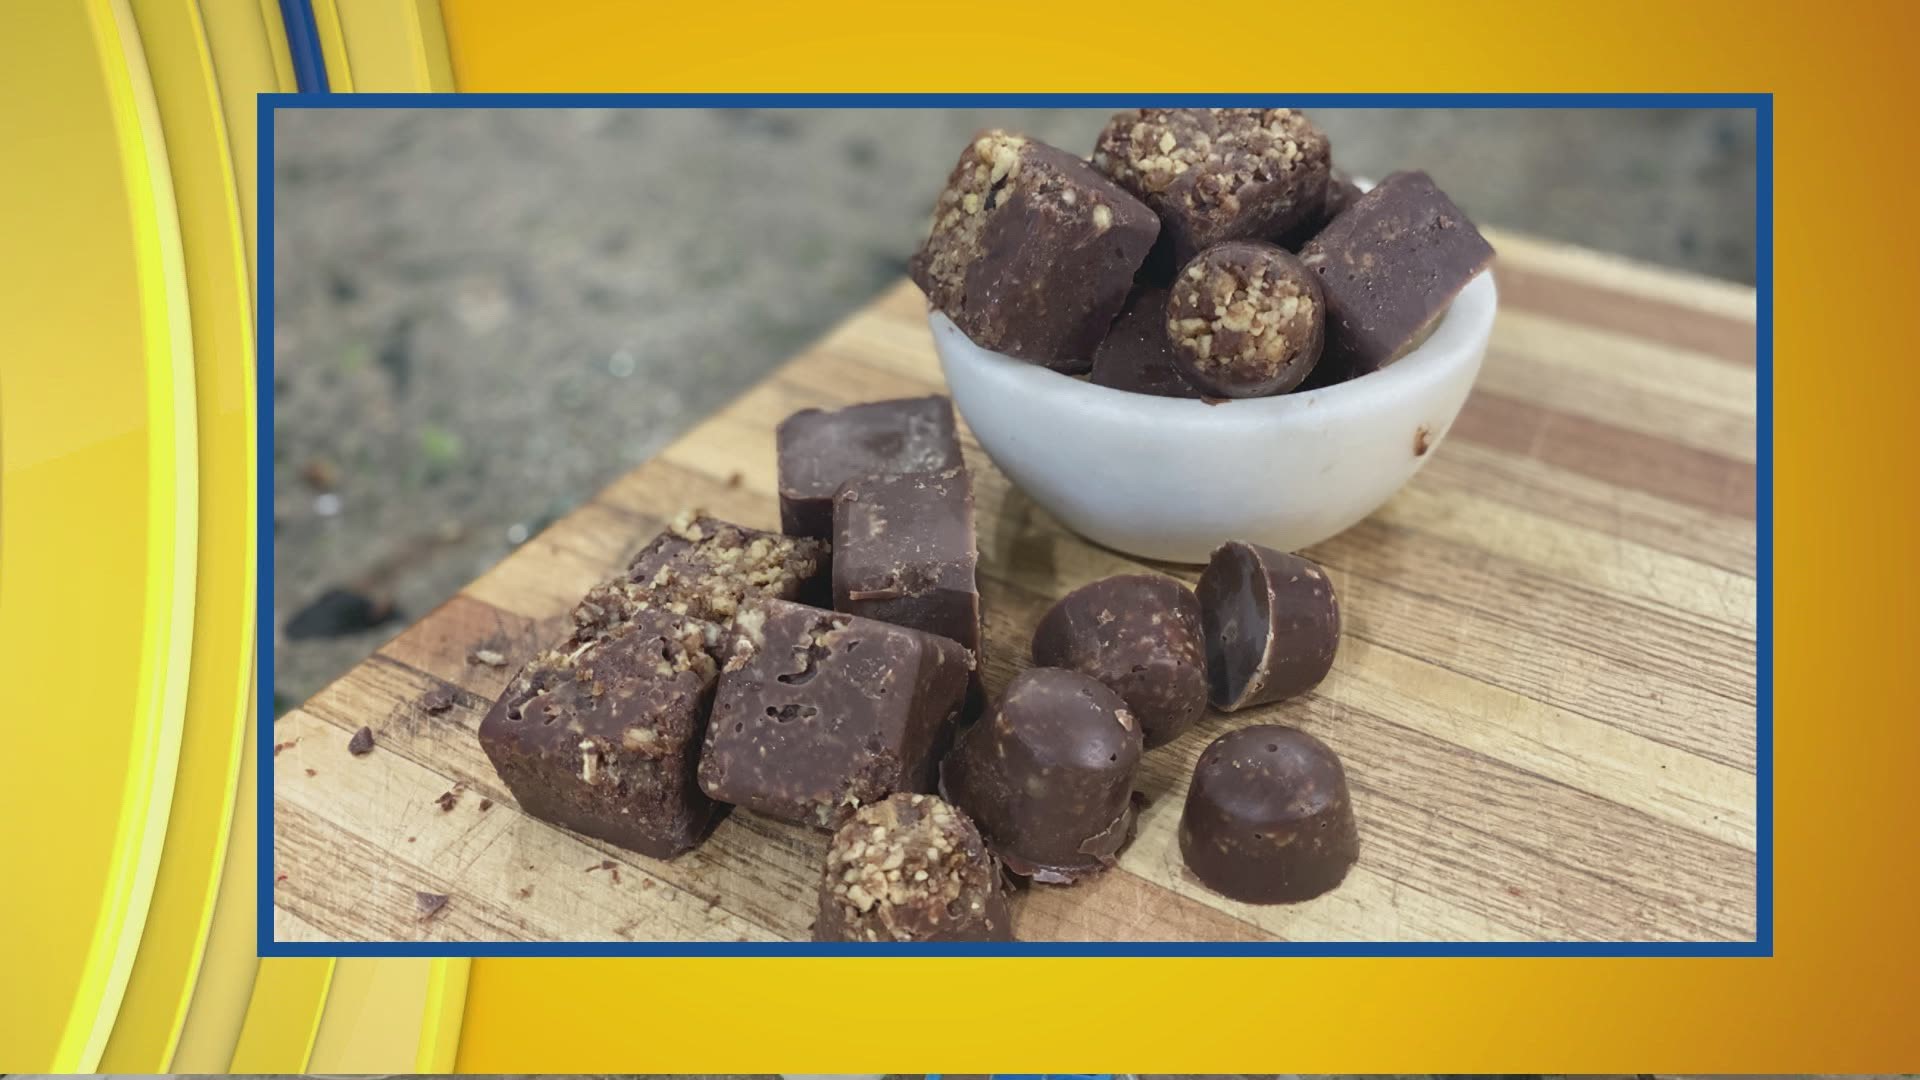 Michele shows us how to create healthy candy blocks this morning on Iowa Live